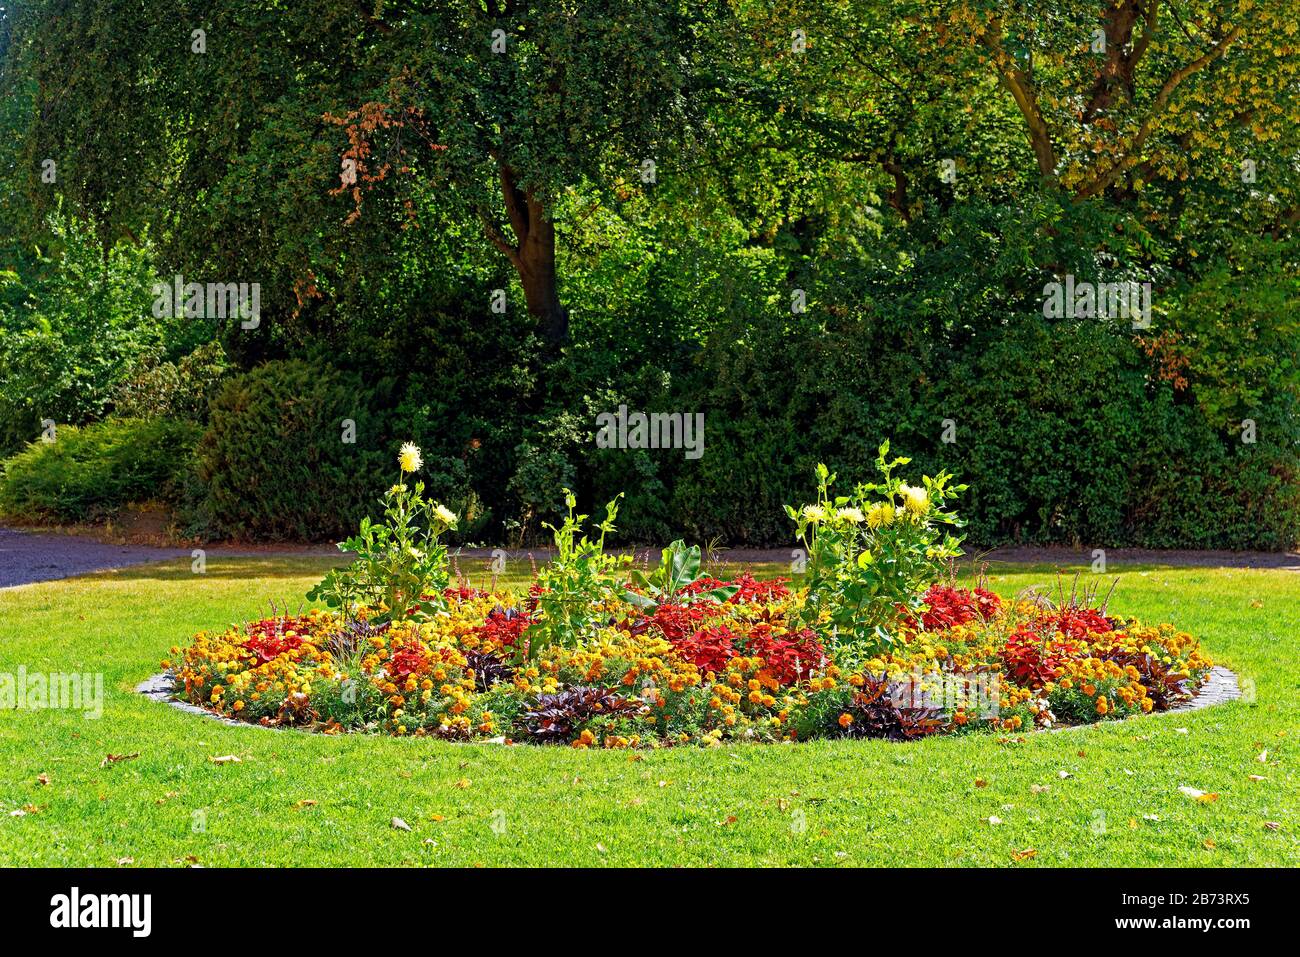 Germany, Rhineland-Palatinate, Speyer, cathedral place, SchUM town, cathedral garden, flowerbed, place of interest, tourism, architecture, historicall Stock Photo